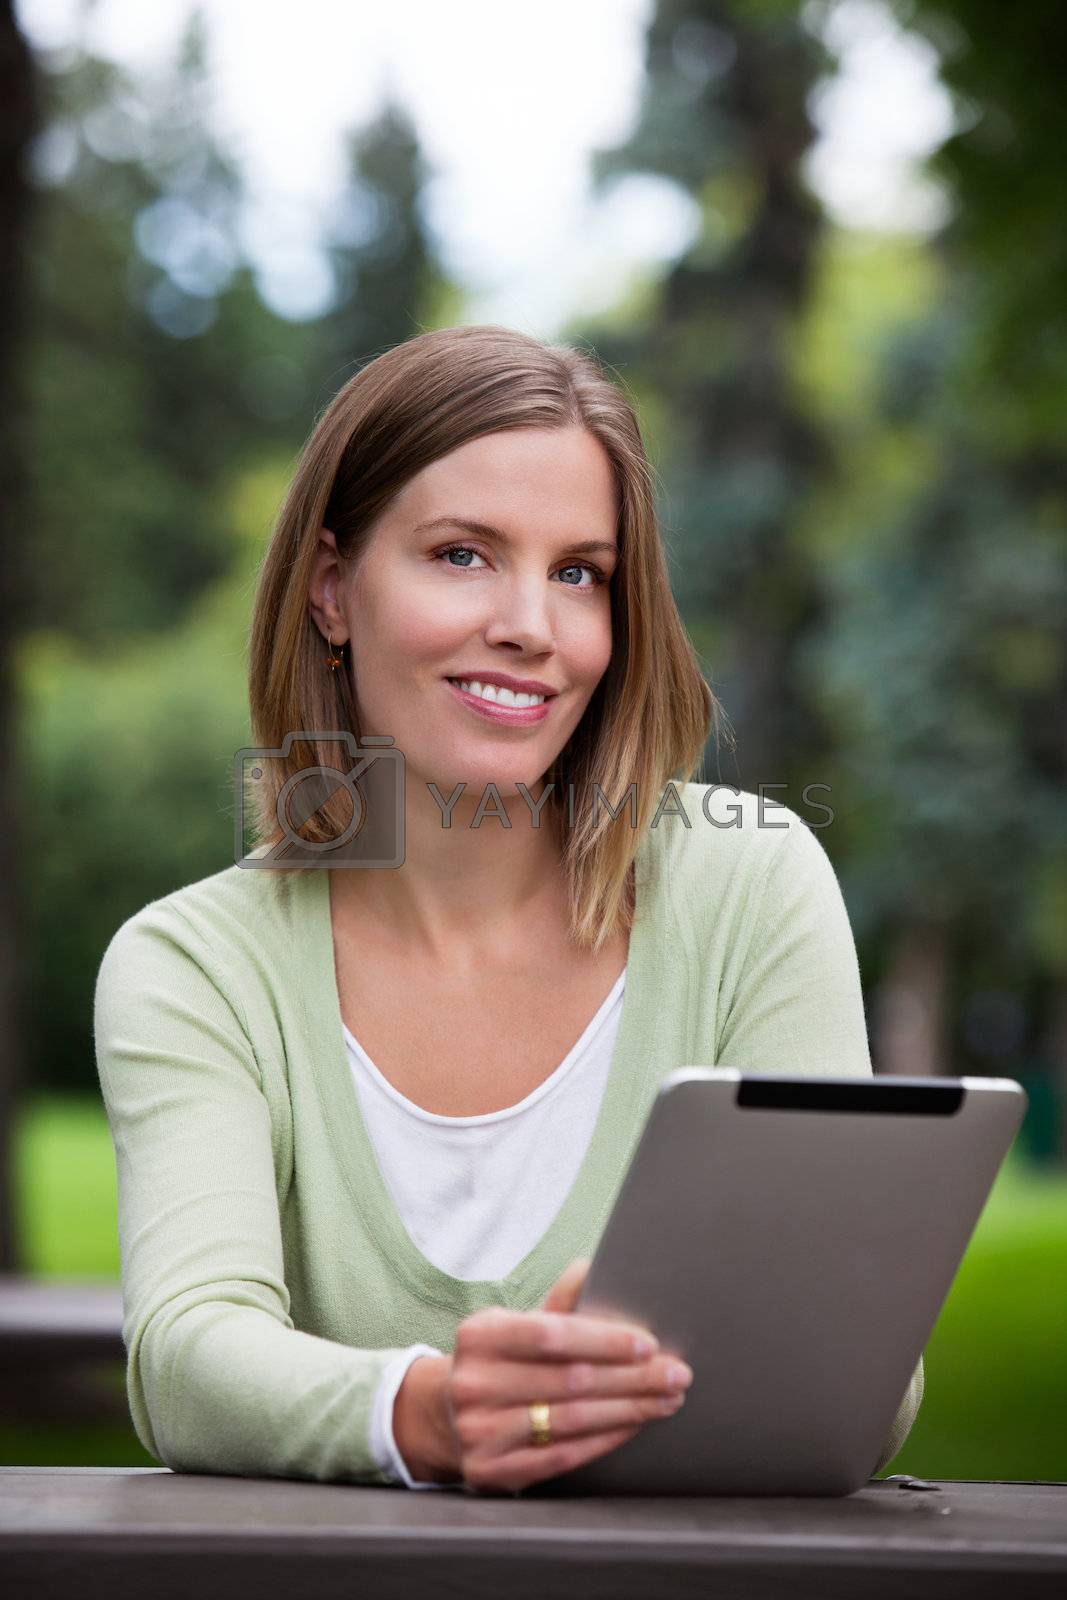 Royalty free image of Woman holding Digital Tablet by leaf